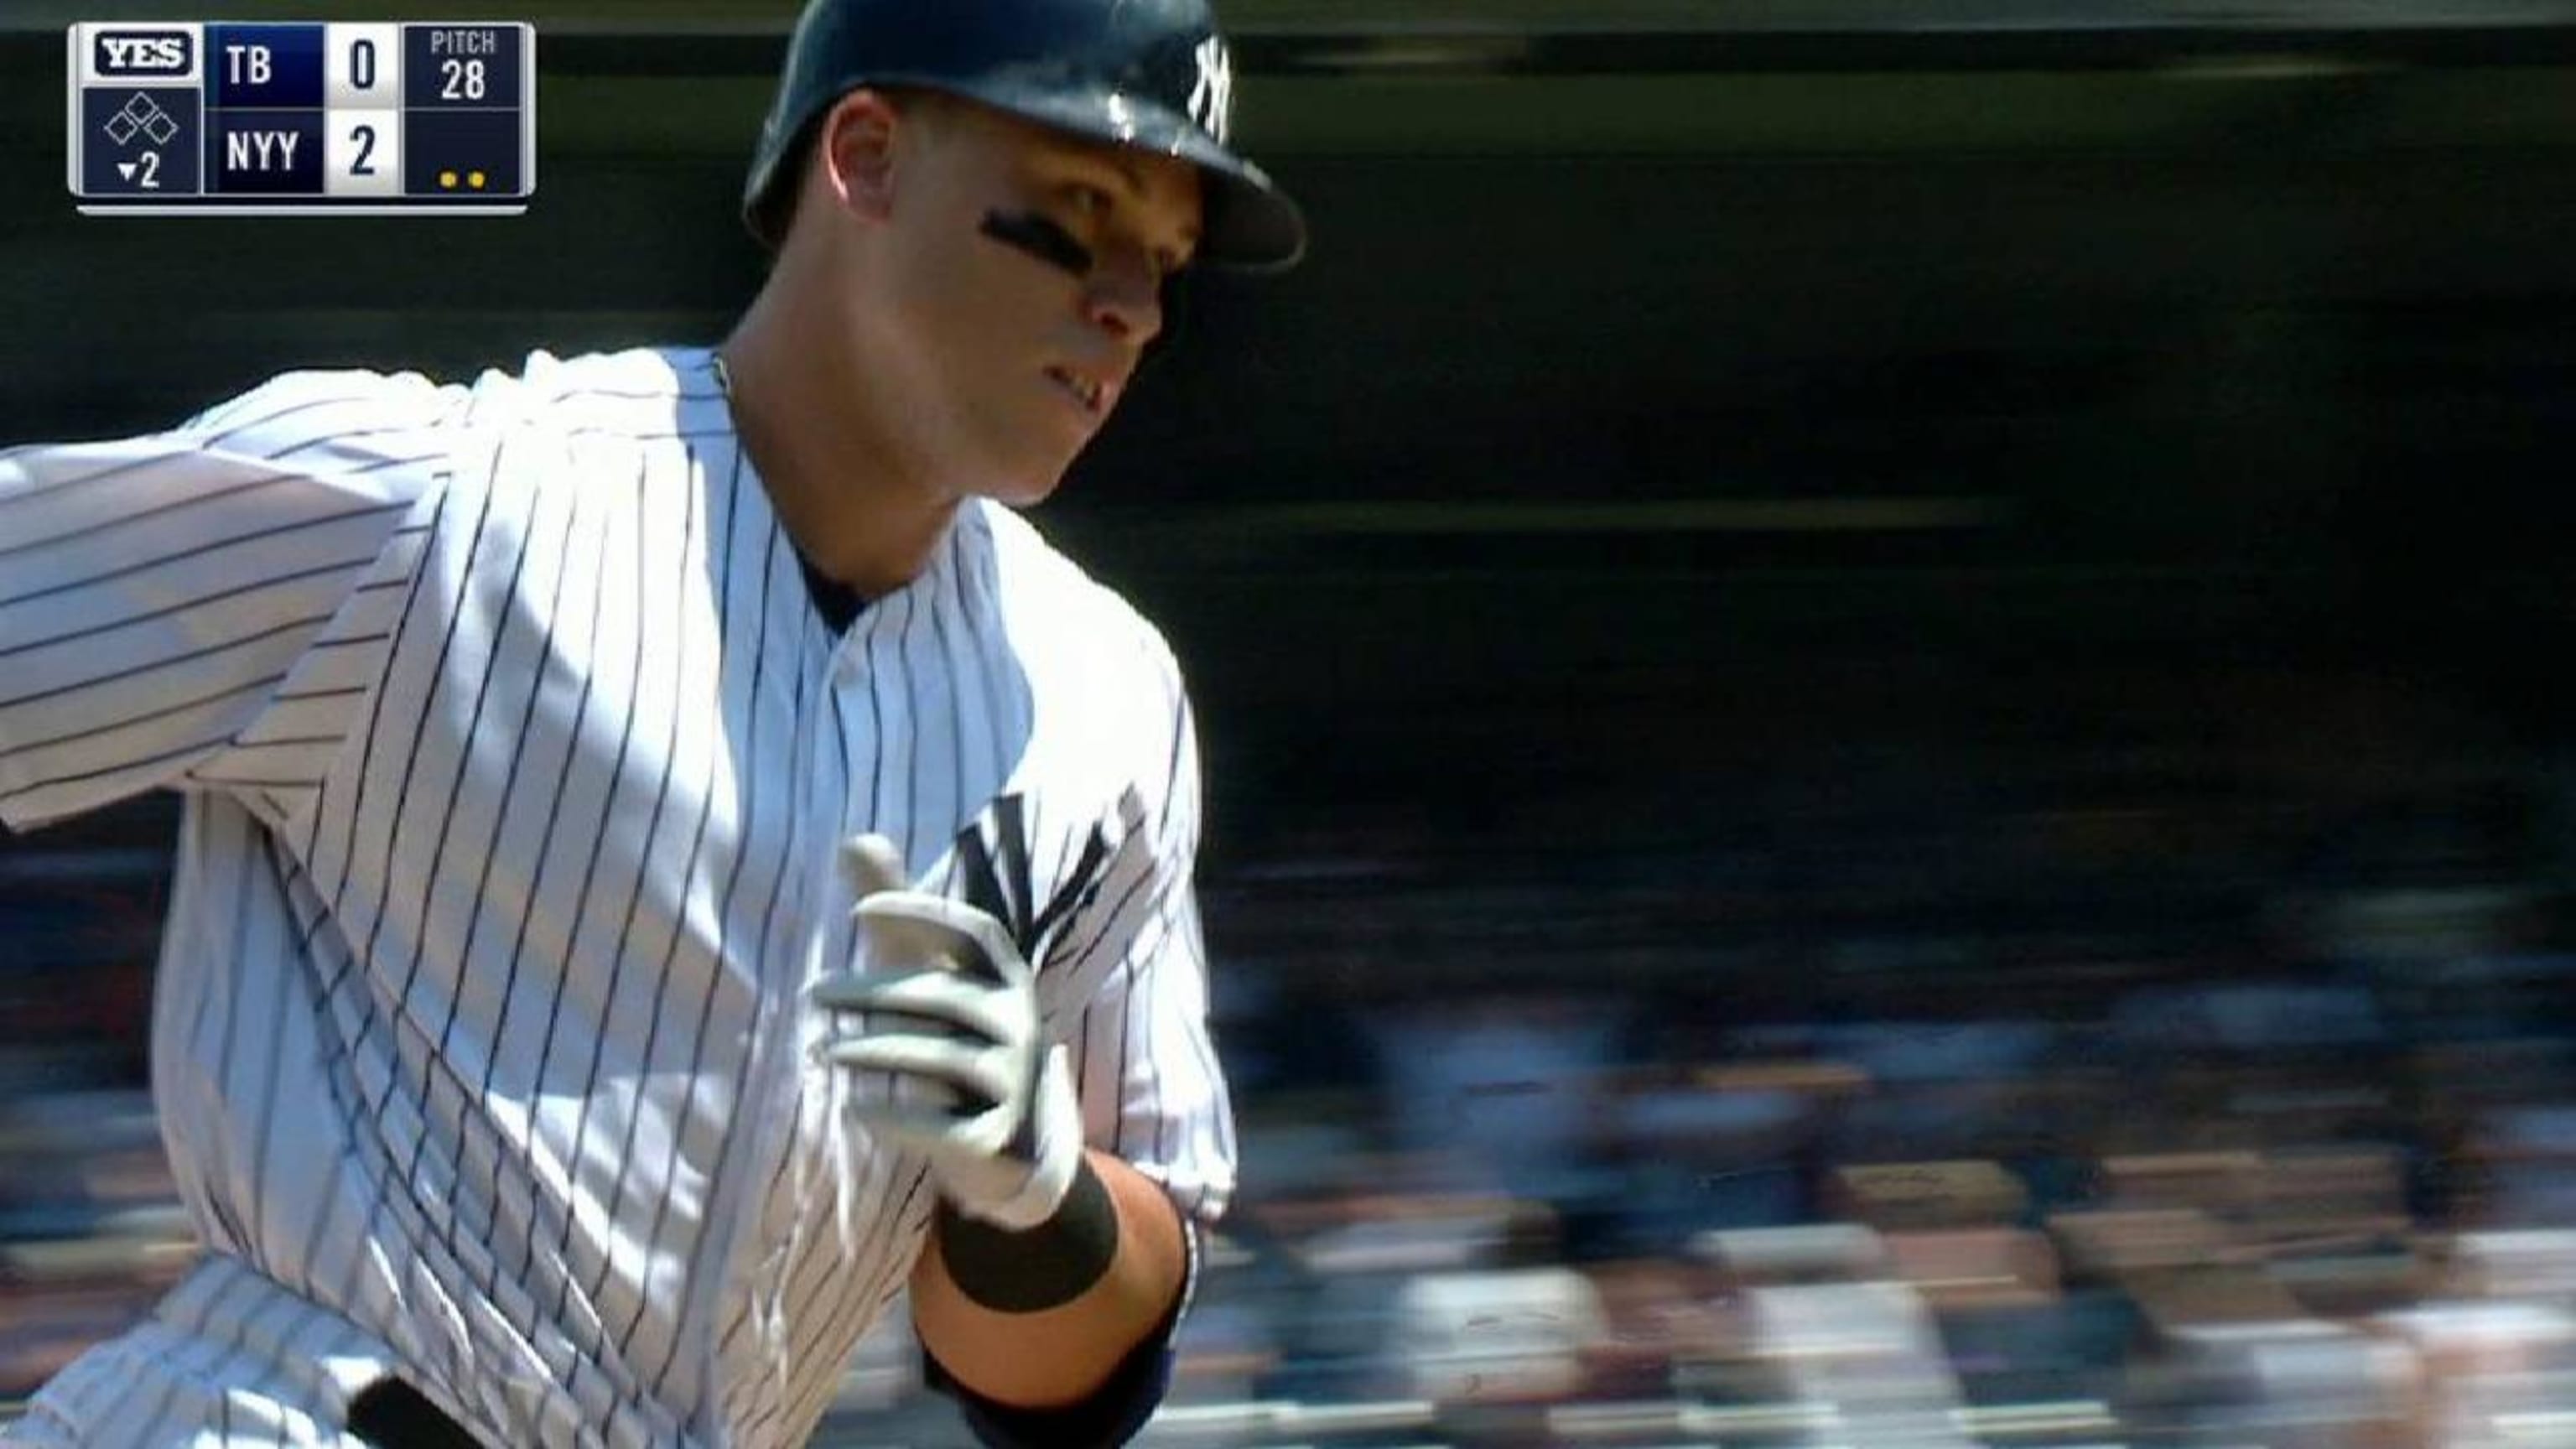 Aaron Judge's first at-bat was a mammoth back-to-back 446-foot